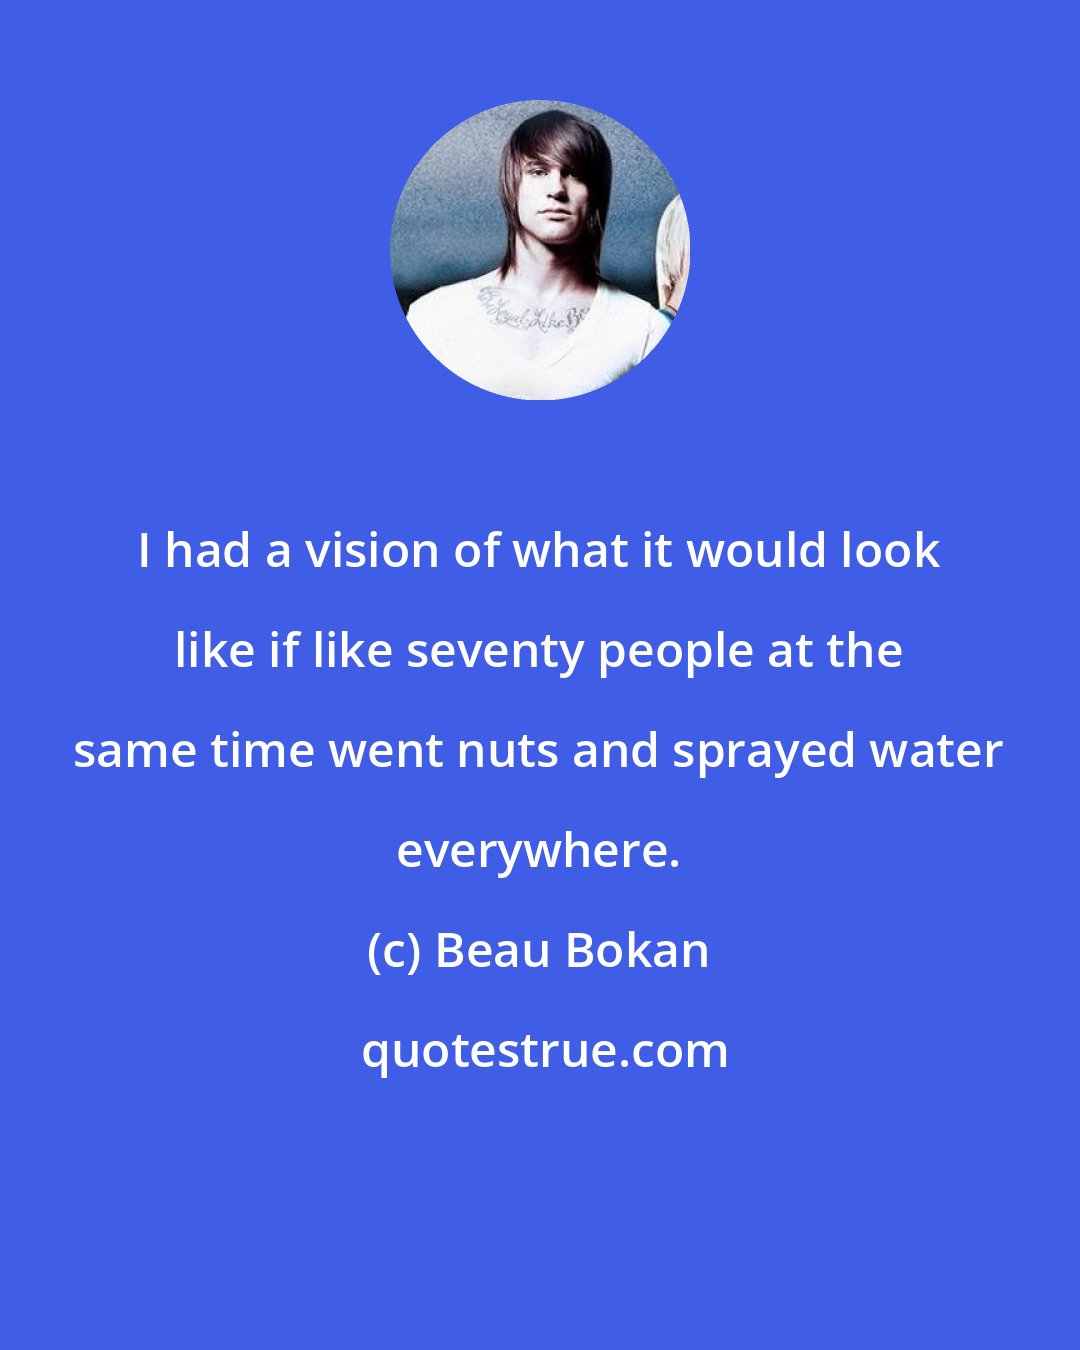 Beau Bokan: I had a vision of what it would look like if like seventy people at the same time went nuts and sprayed water everywhere.